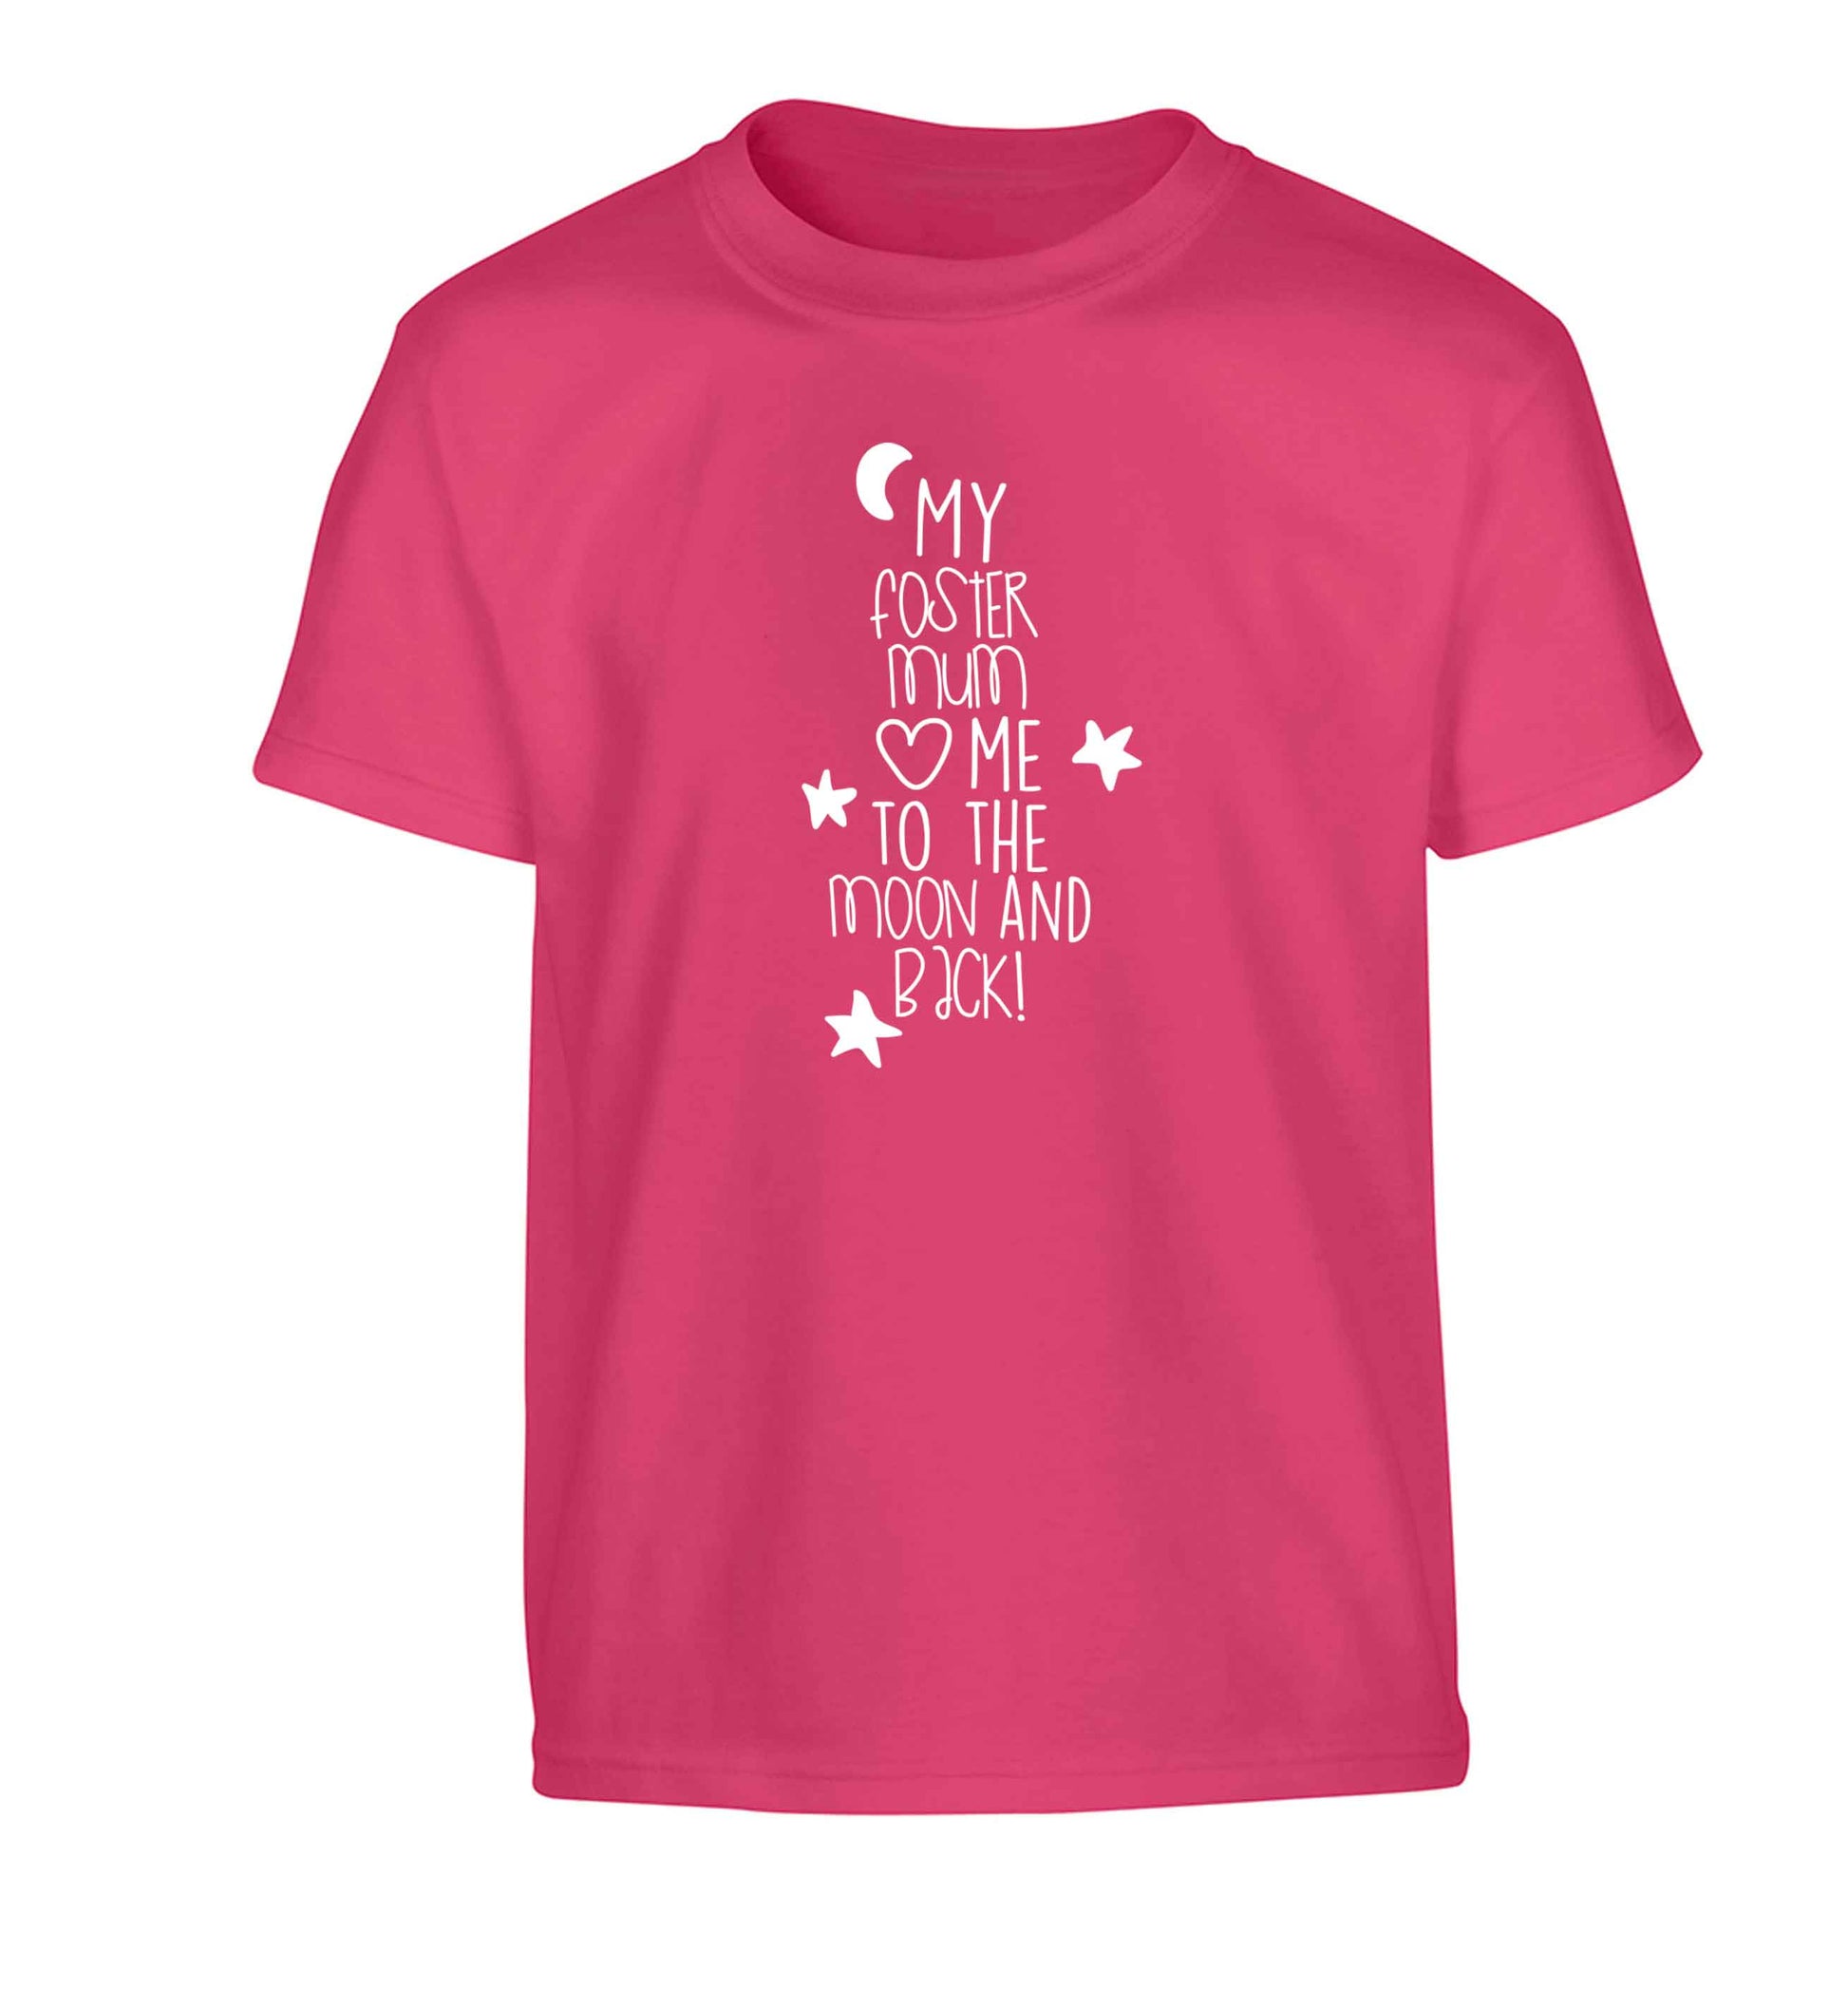 My foster mum loves me to the moon and back Children's pink Tshirt 12-13 Years